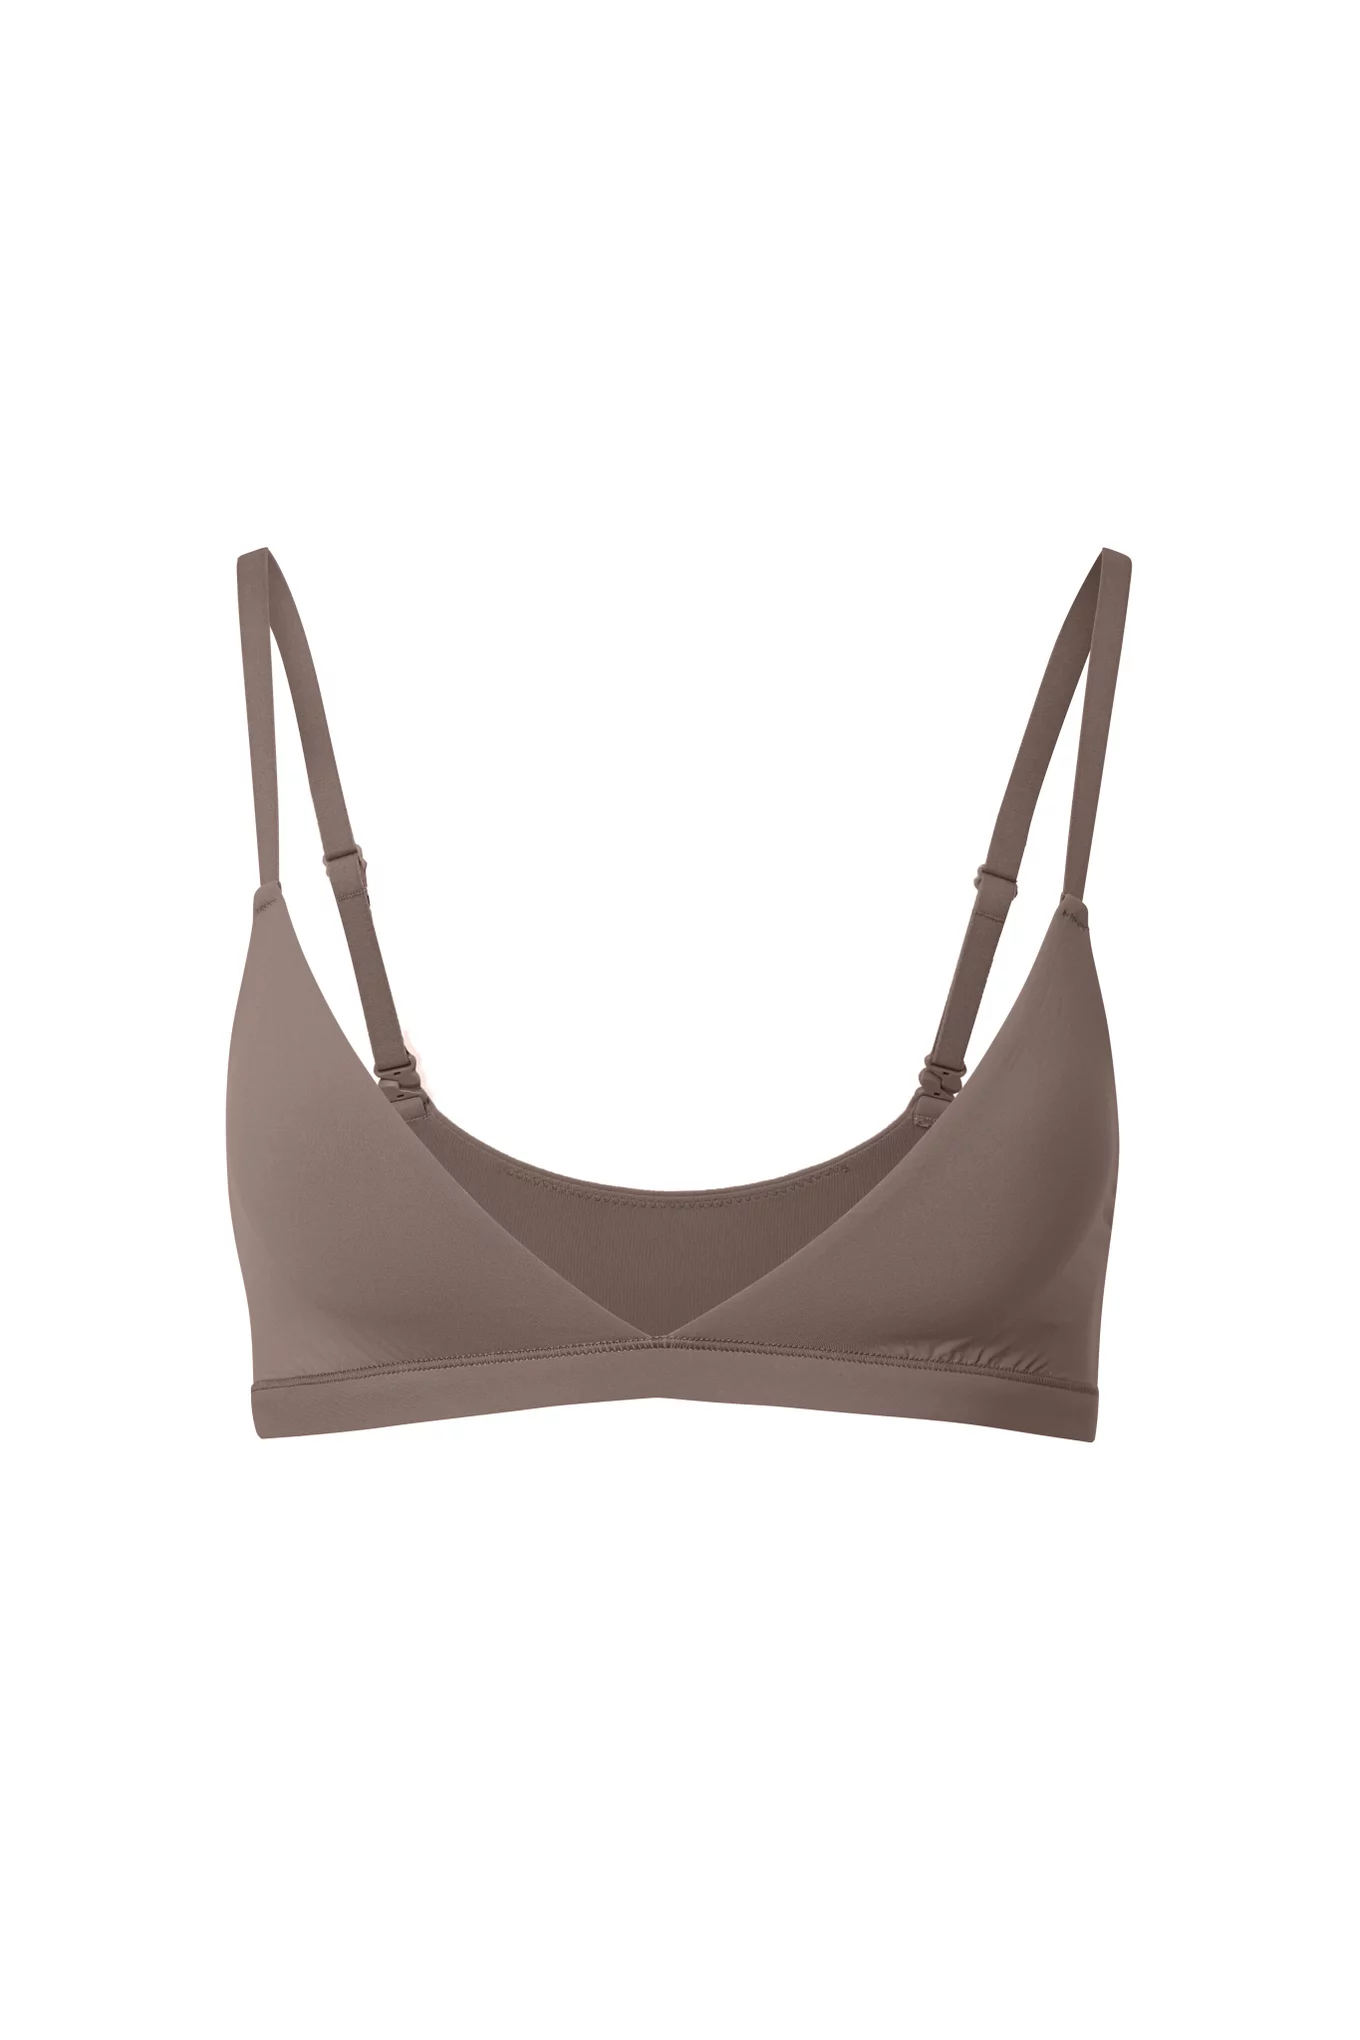 Skims Fits Everybody Triangle Bralette in Brown